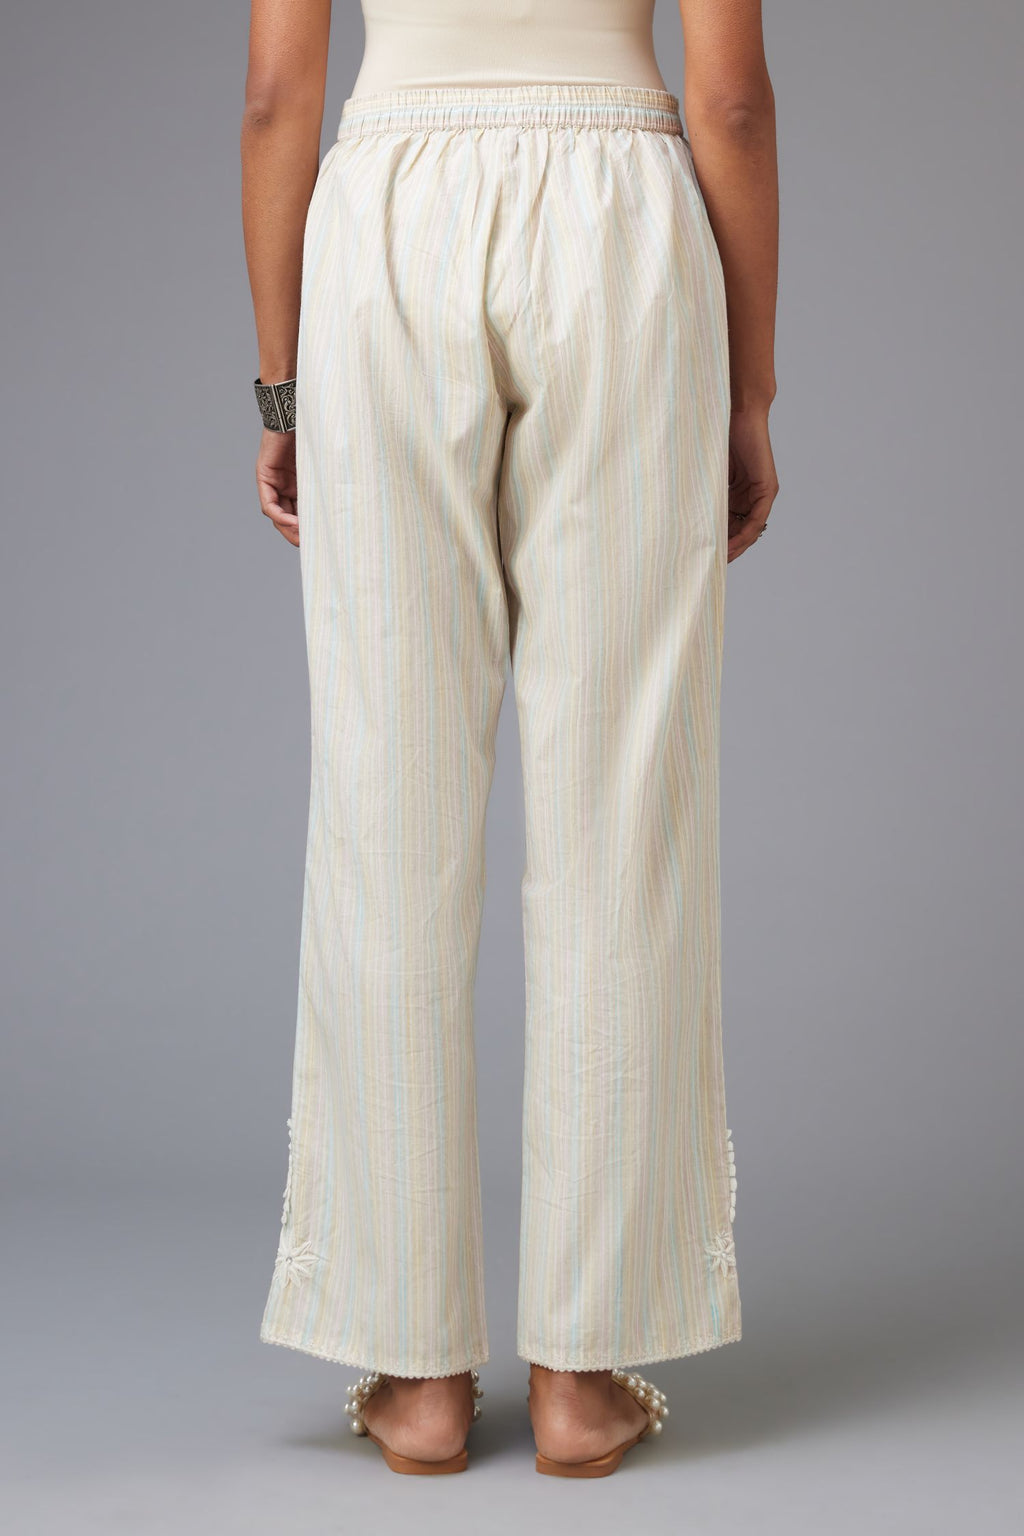 Multi printed stripe Cotton straight pants with a chiffon embroidered boota at the hem.